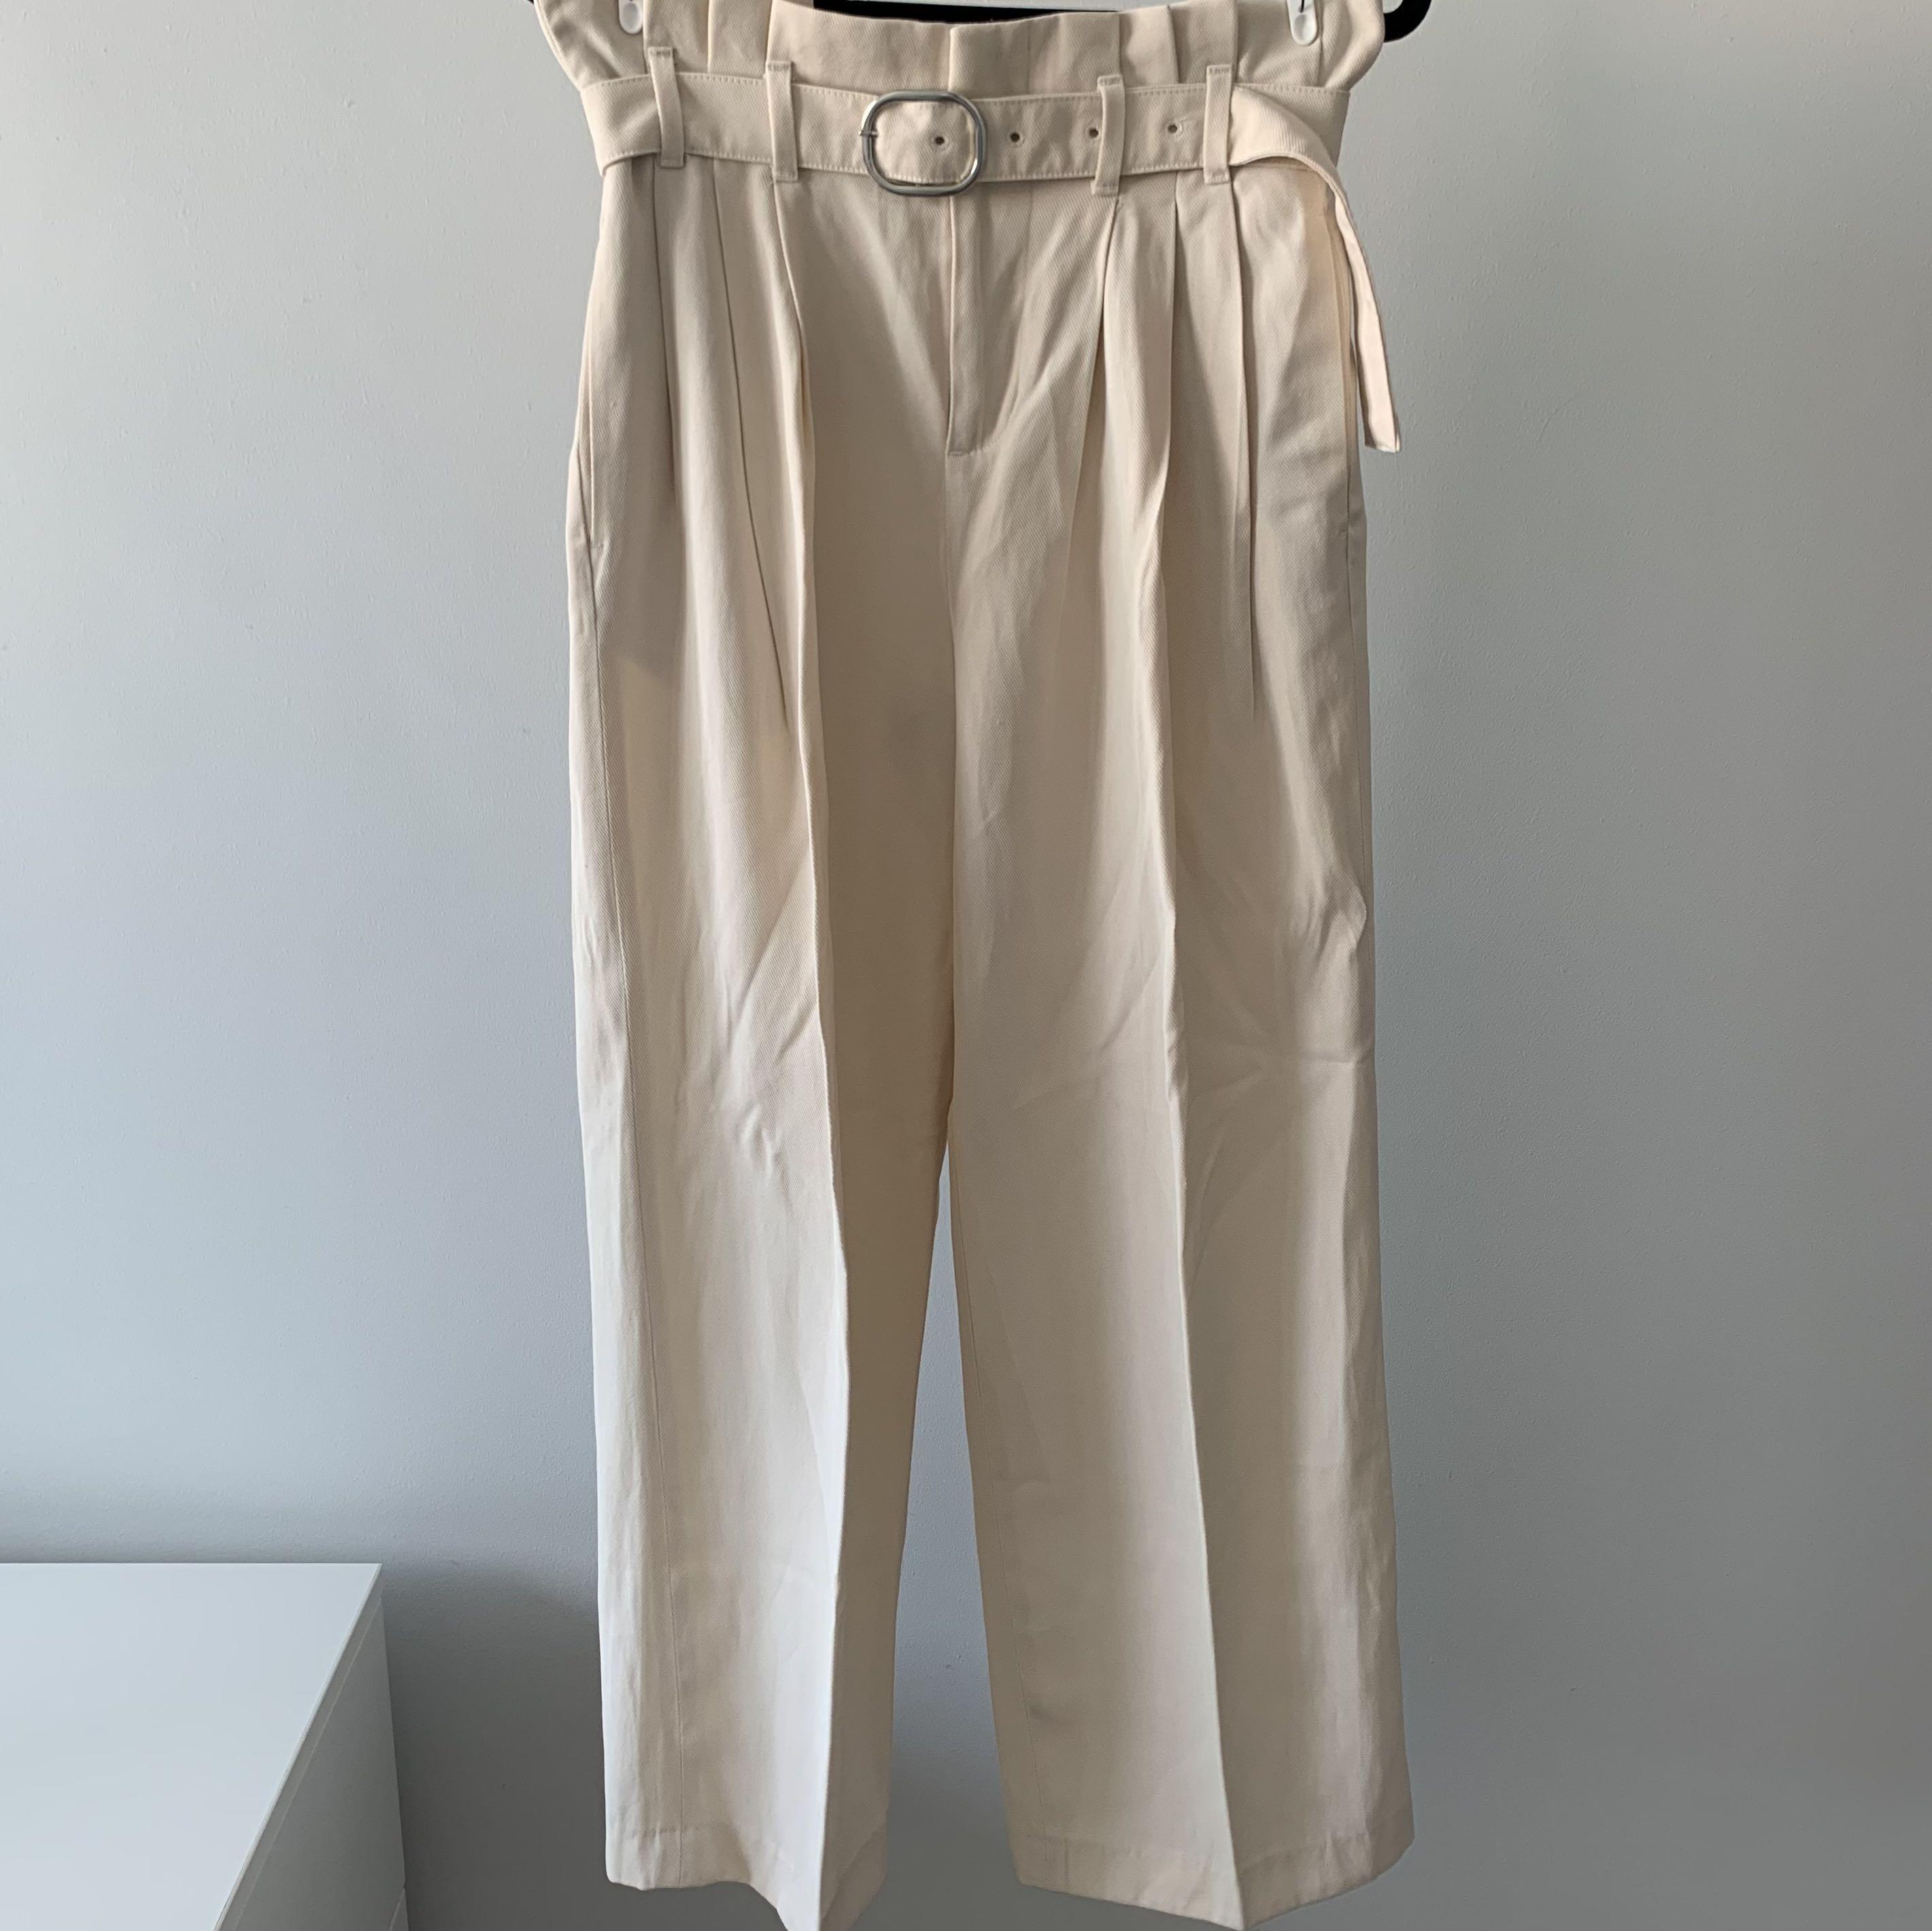 ZARA Belted High Waisted Paperbag Trousers